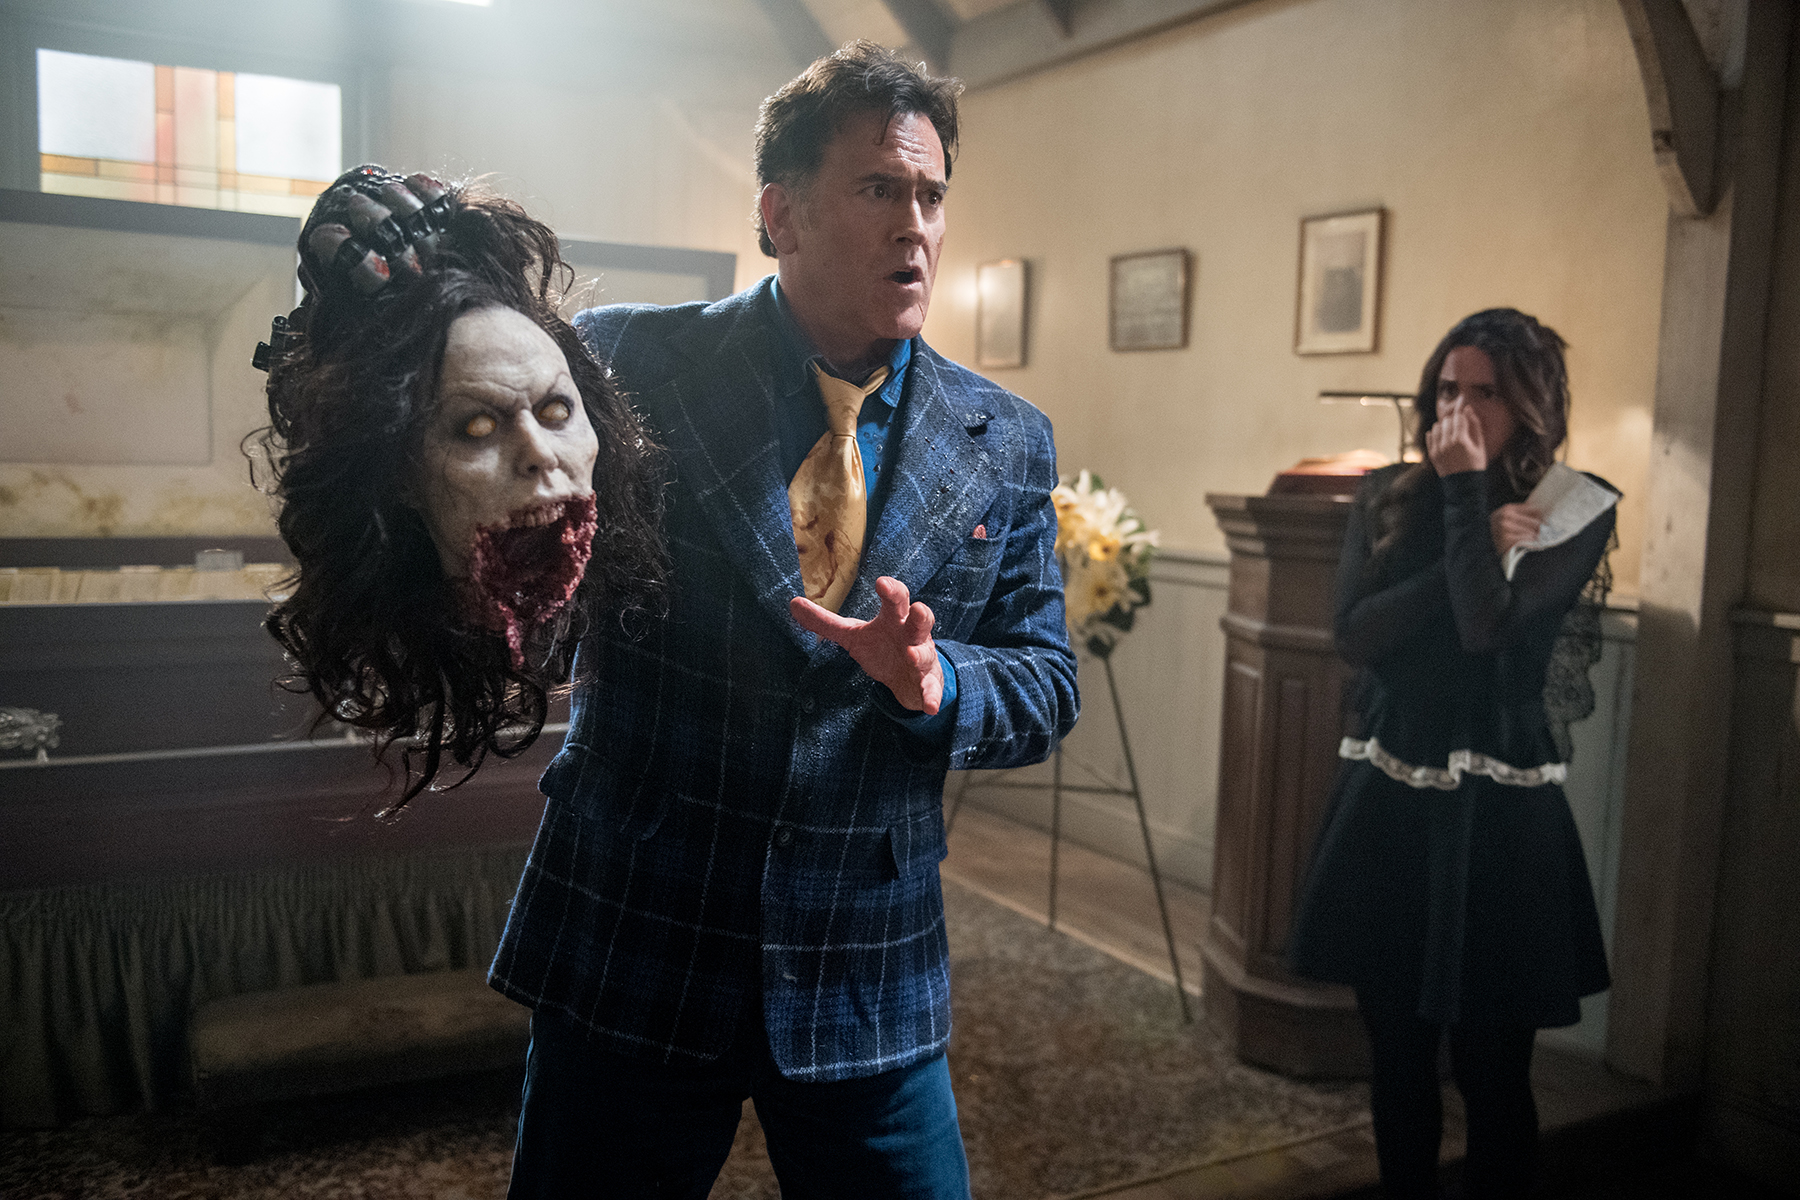 Making Ash A Dad On Ash Vs. Evil Dead Has Made The Show Even More Kick-Arse